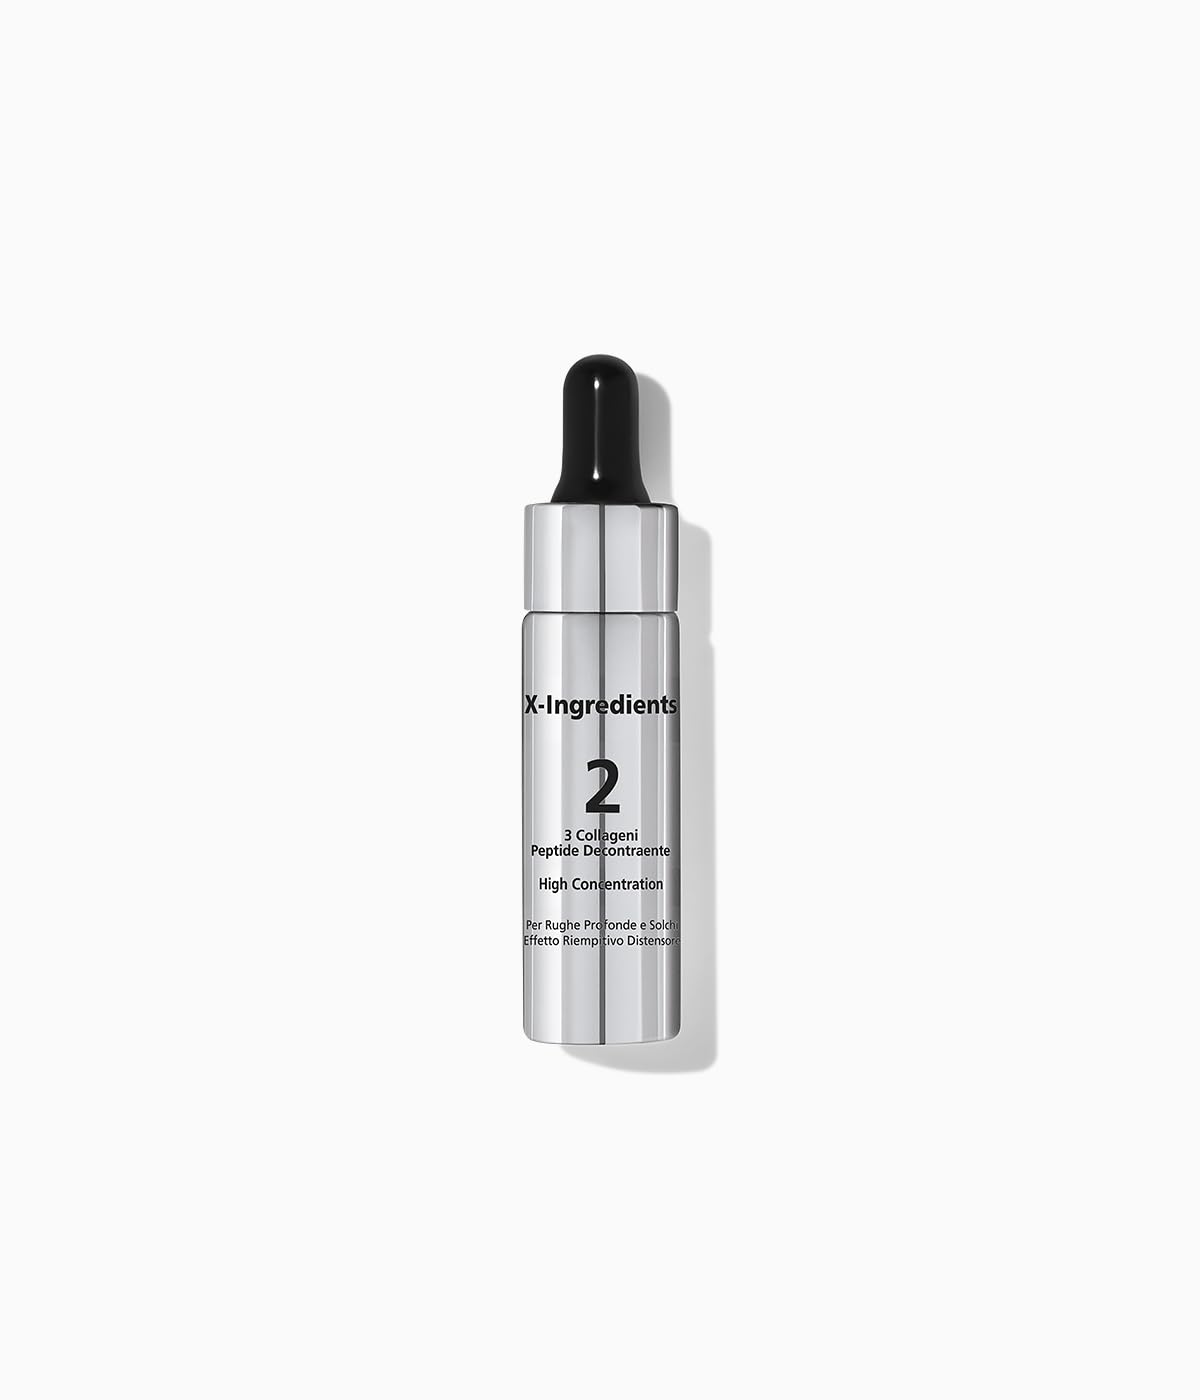 Labo X-Ingredients Strong Ingredient 2 for Deep Wrinkles 10ml